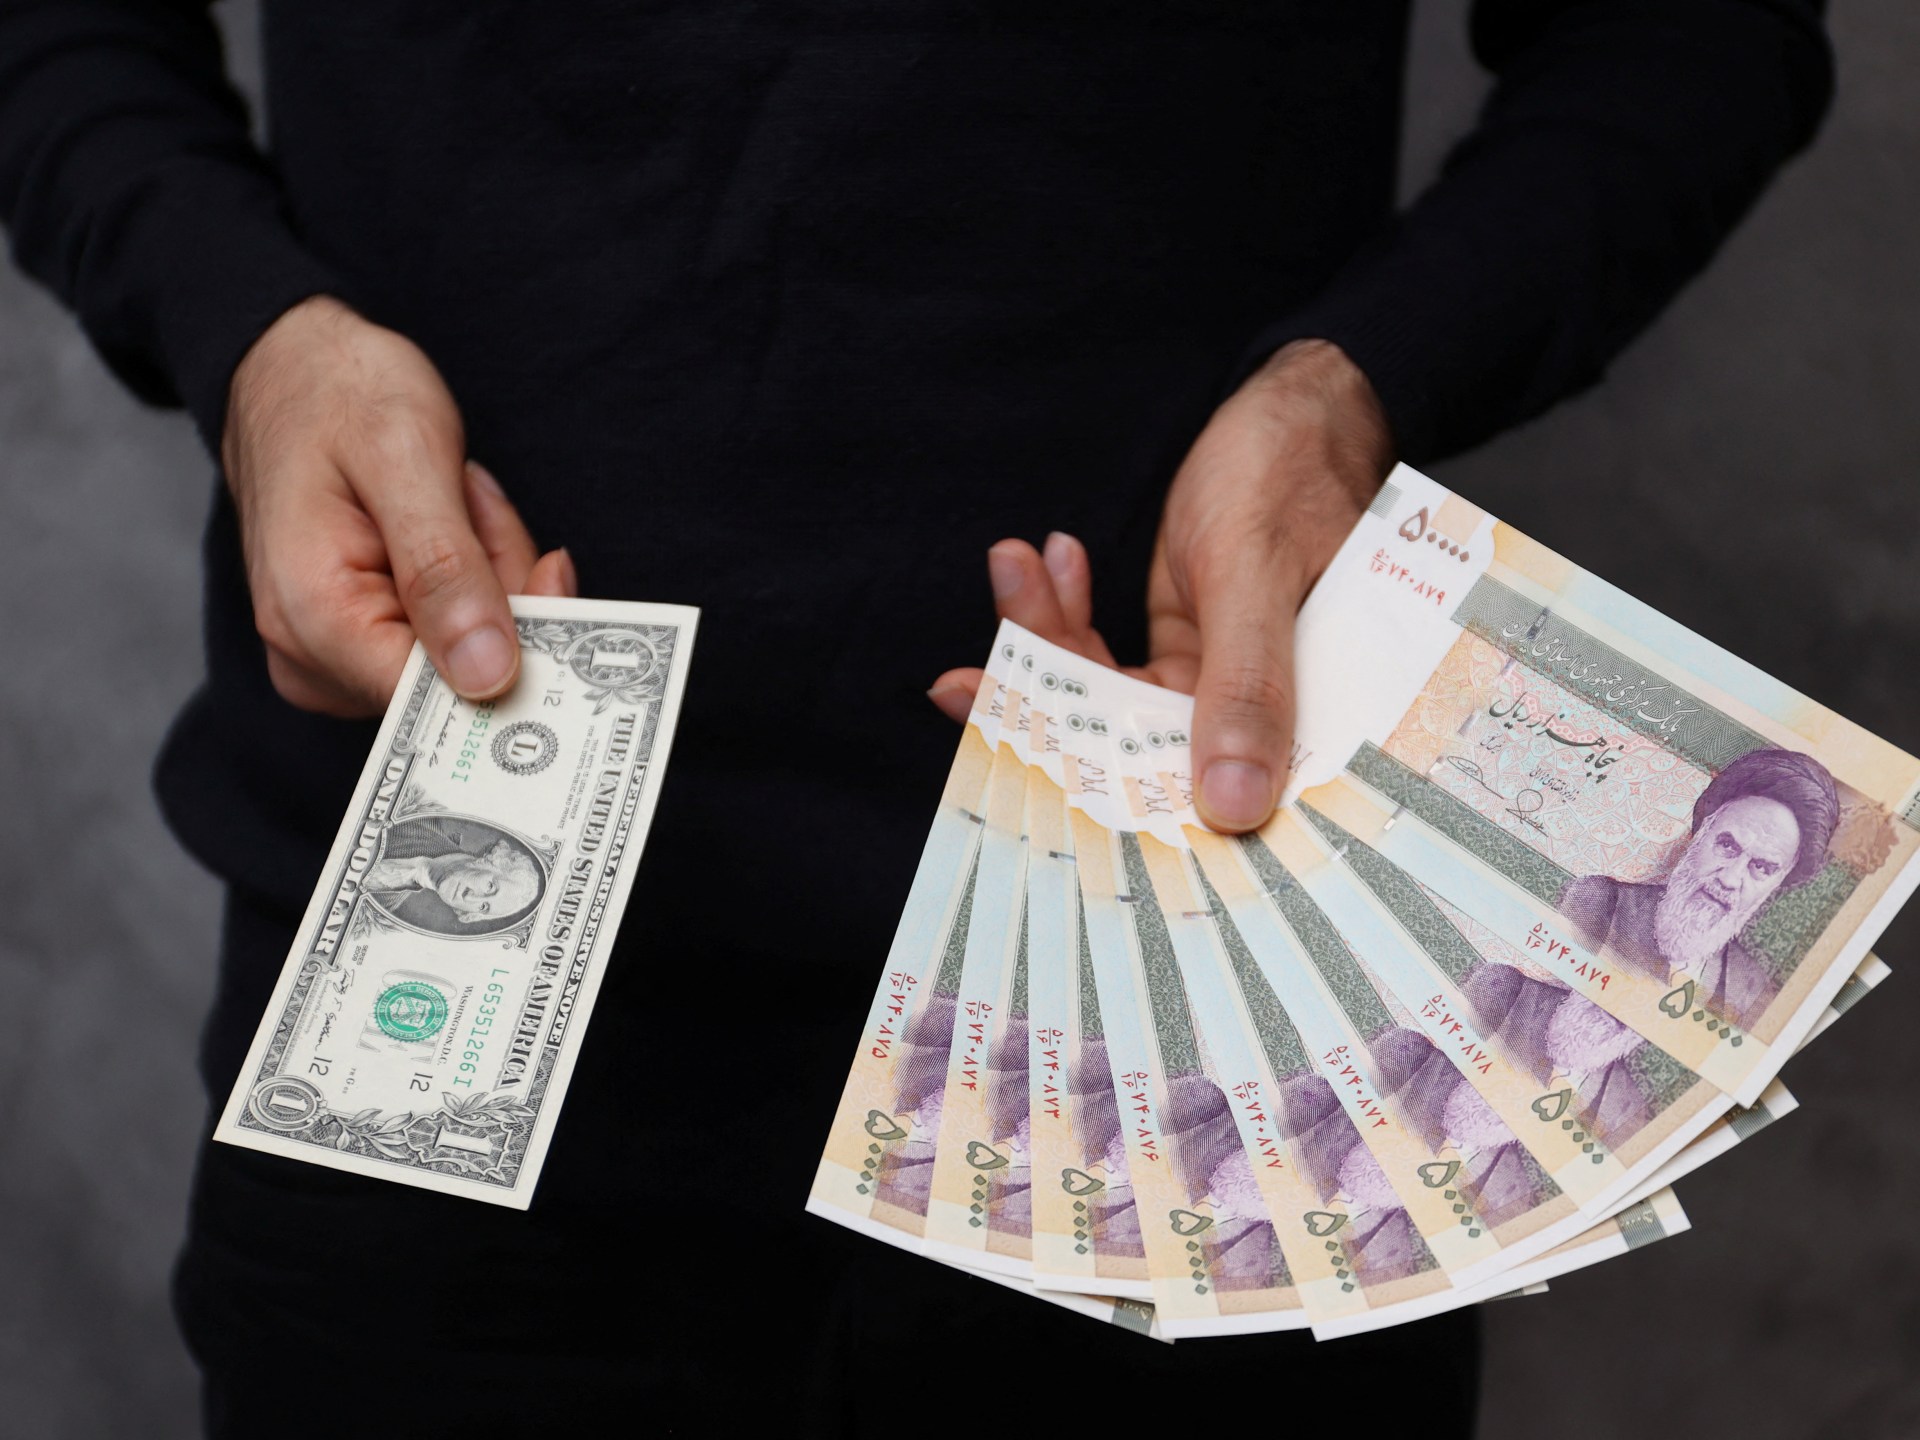 Iran’s currency hits record low amid tensions with the West